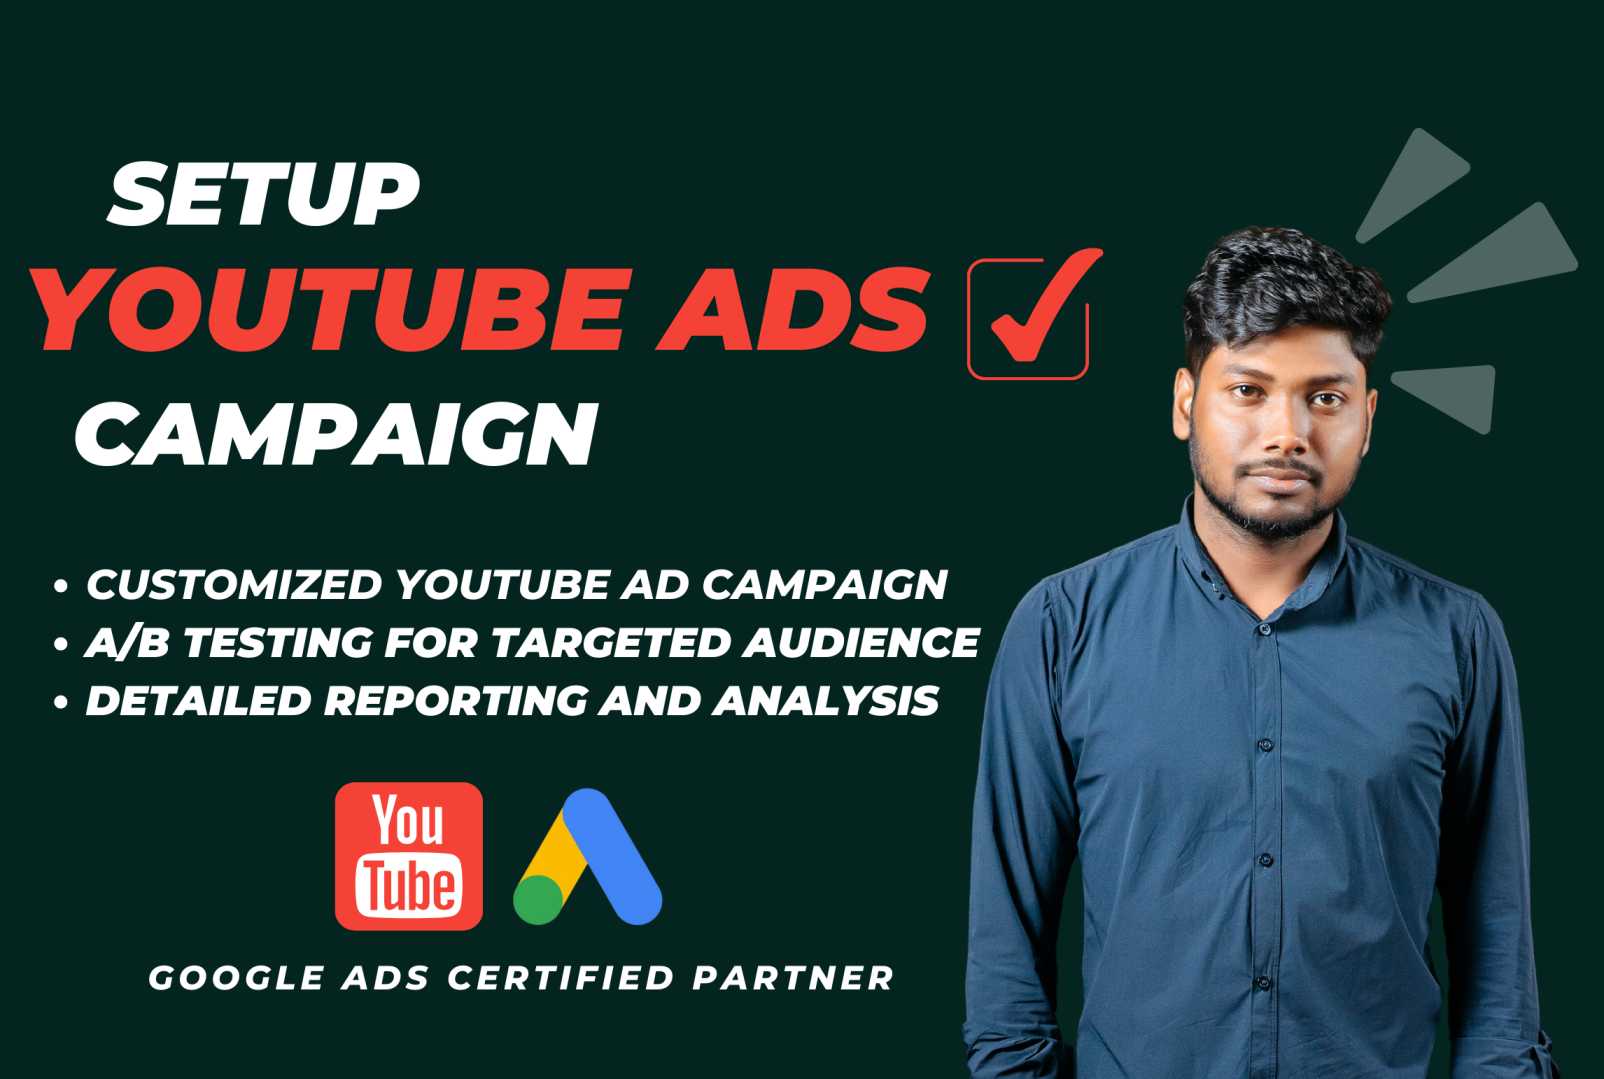 I will create and optimize your YouTube video ads campaign with google ads promotion